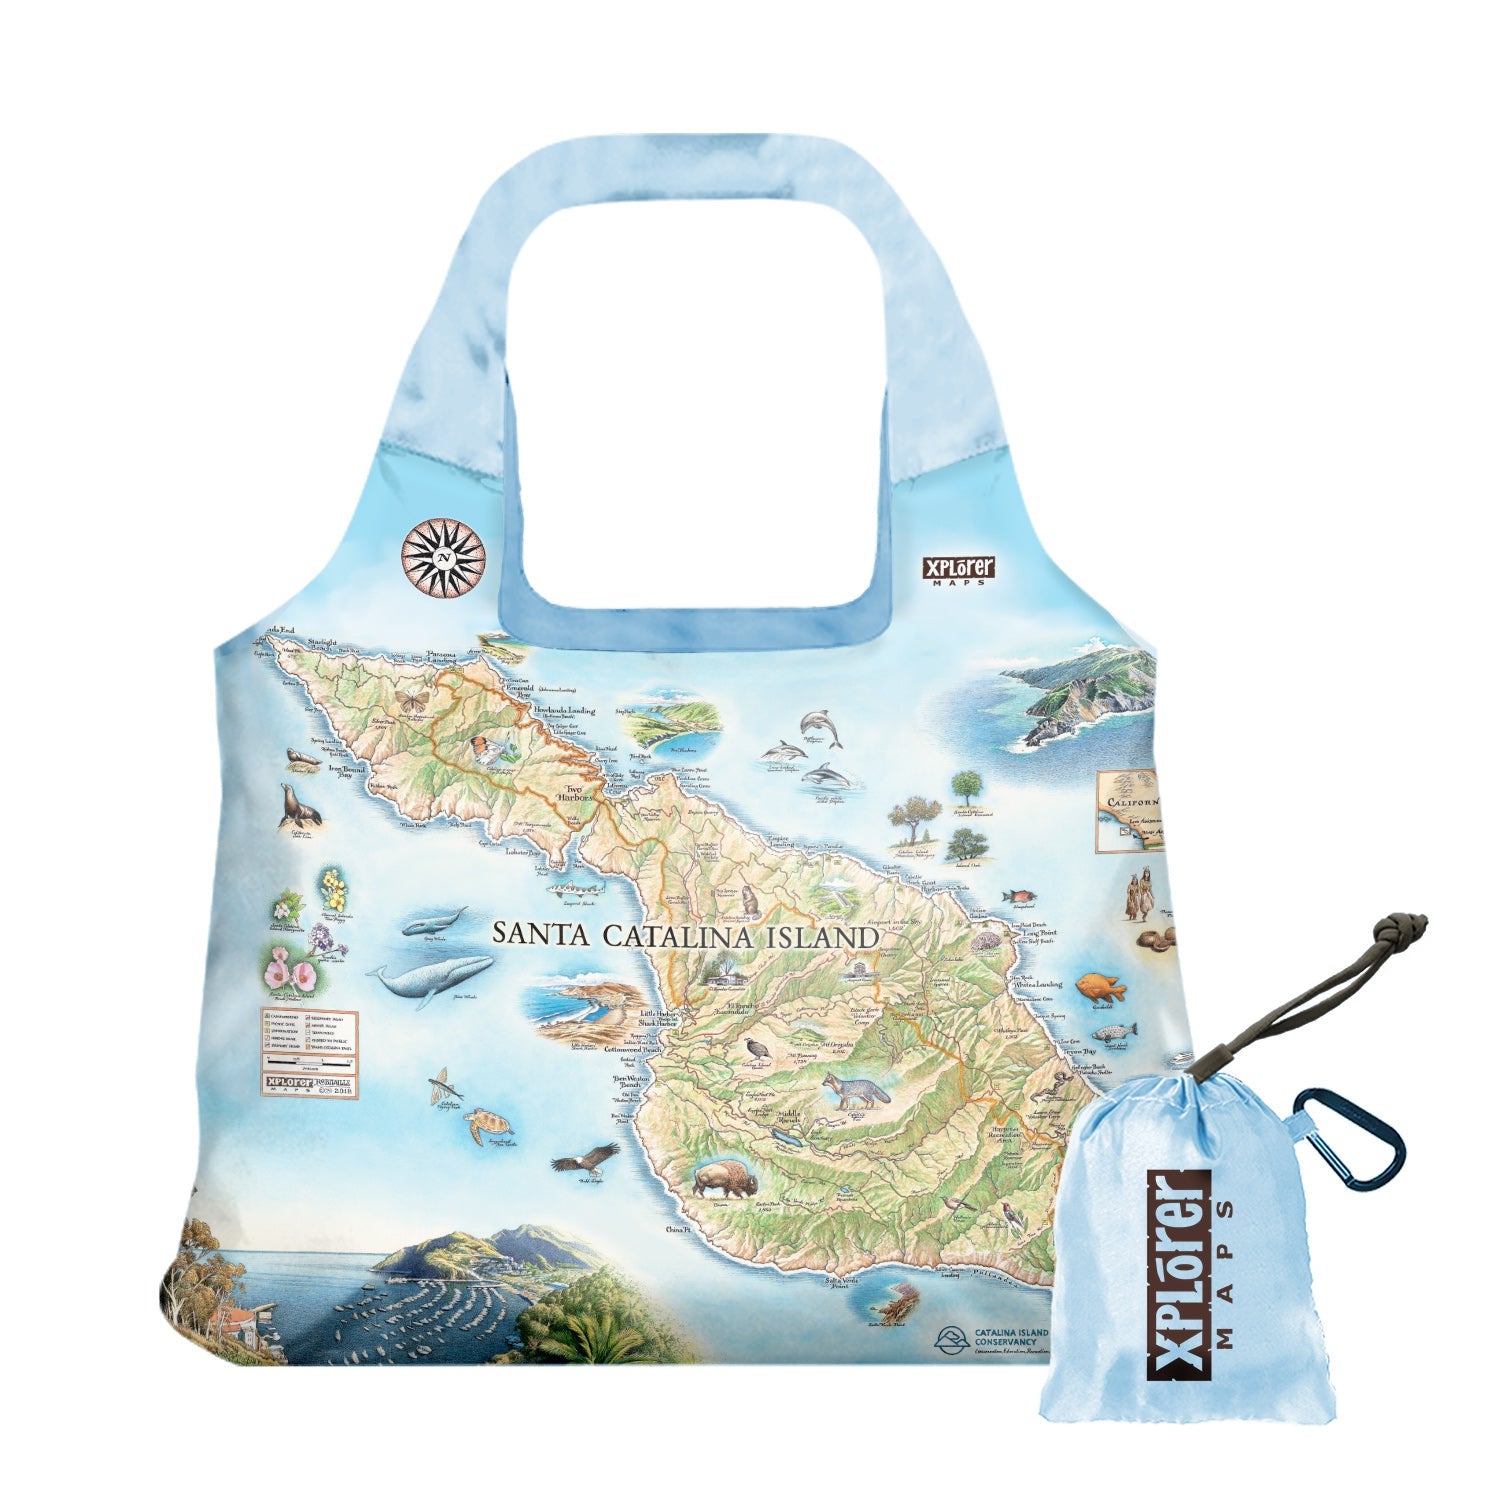 California's Santa Catalina Islands Map Pouch Tote Bags by Xplorer Maps. The map features illustrations of places such as Wrigley Memorial, El Rancho Escondido, and Avalon Bay. Flora and fauna include Bison, Catalina Island Fox, Catalina Orange Lip butterfly, Channel Islands tree poppy, and Island oak. 